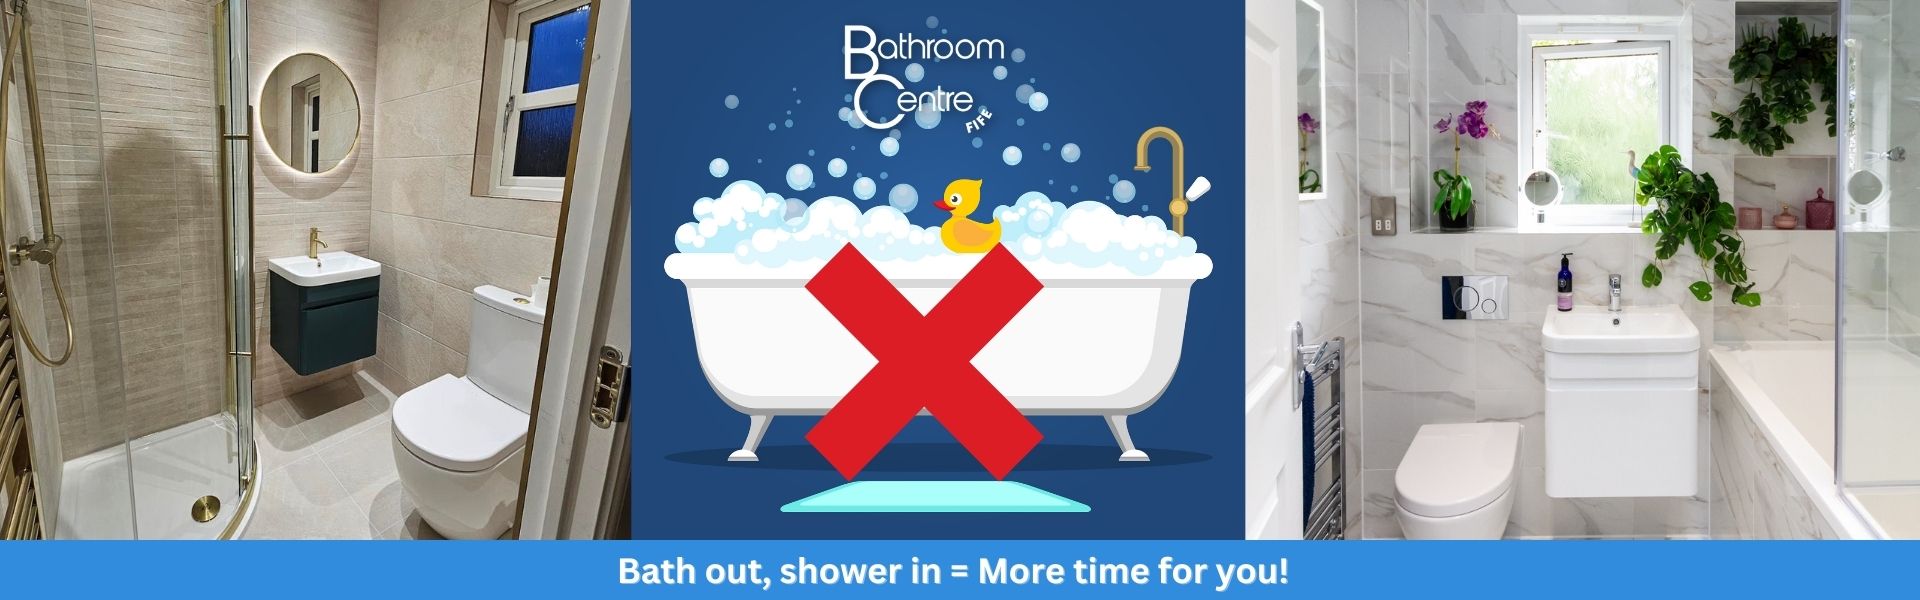 BCF - Bath out, shower in = More time for you!
